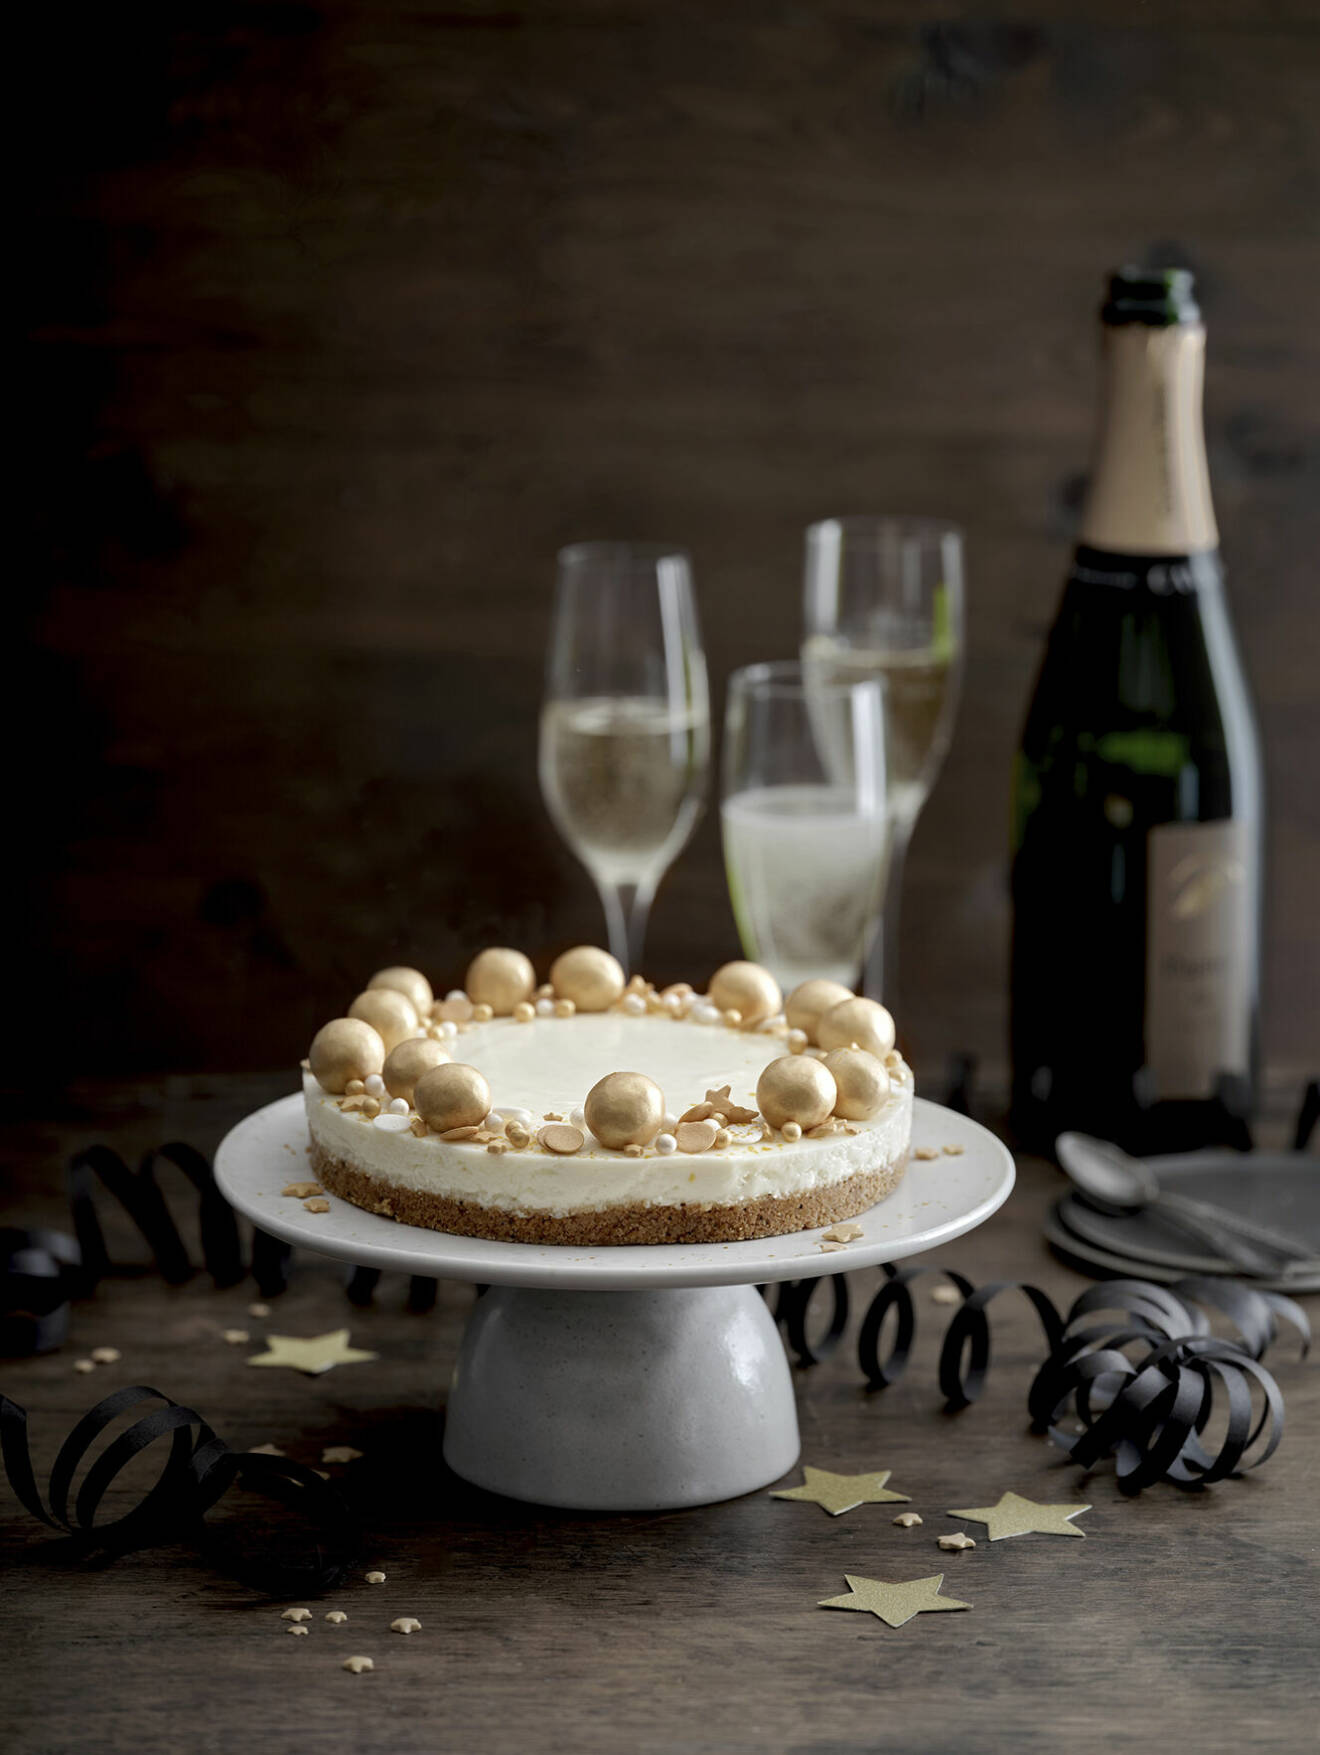 Lyxig cheesecake med champagne och lakrits